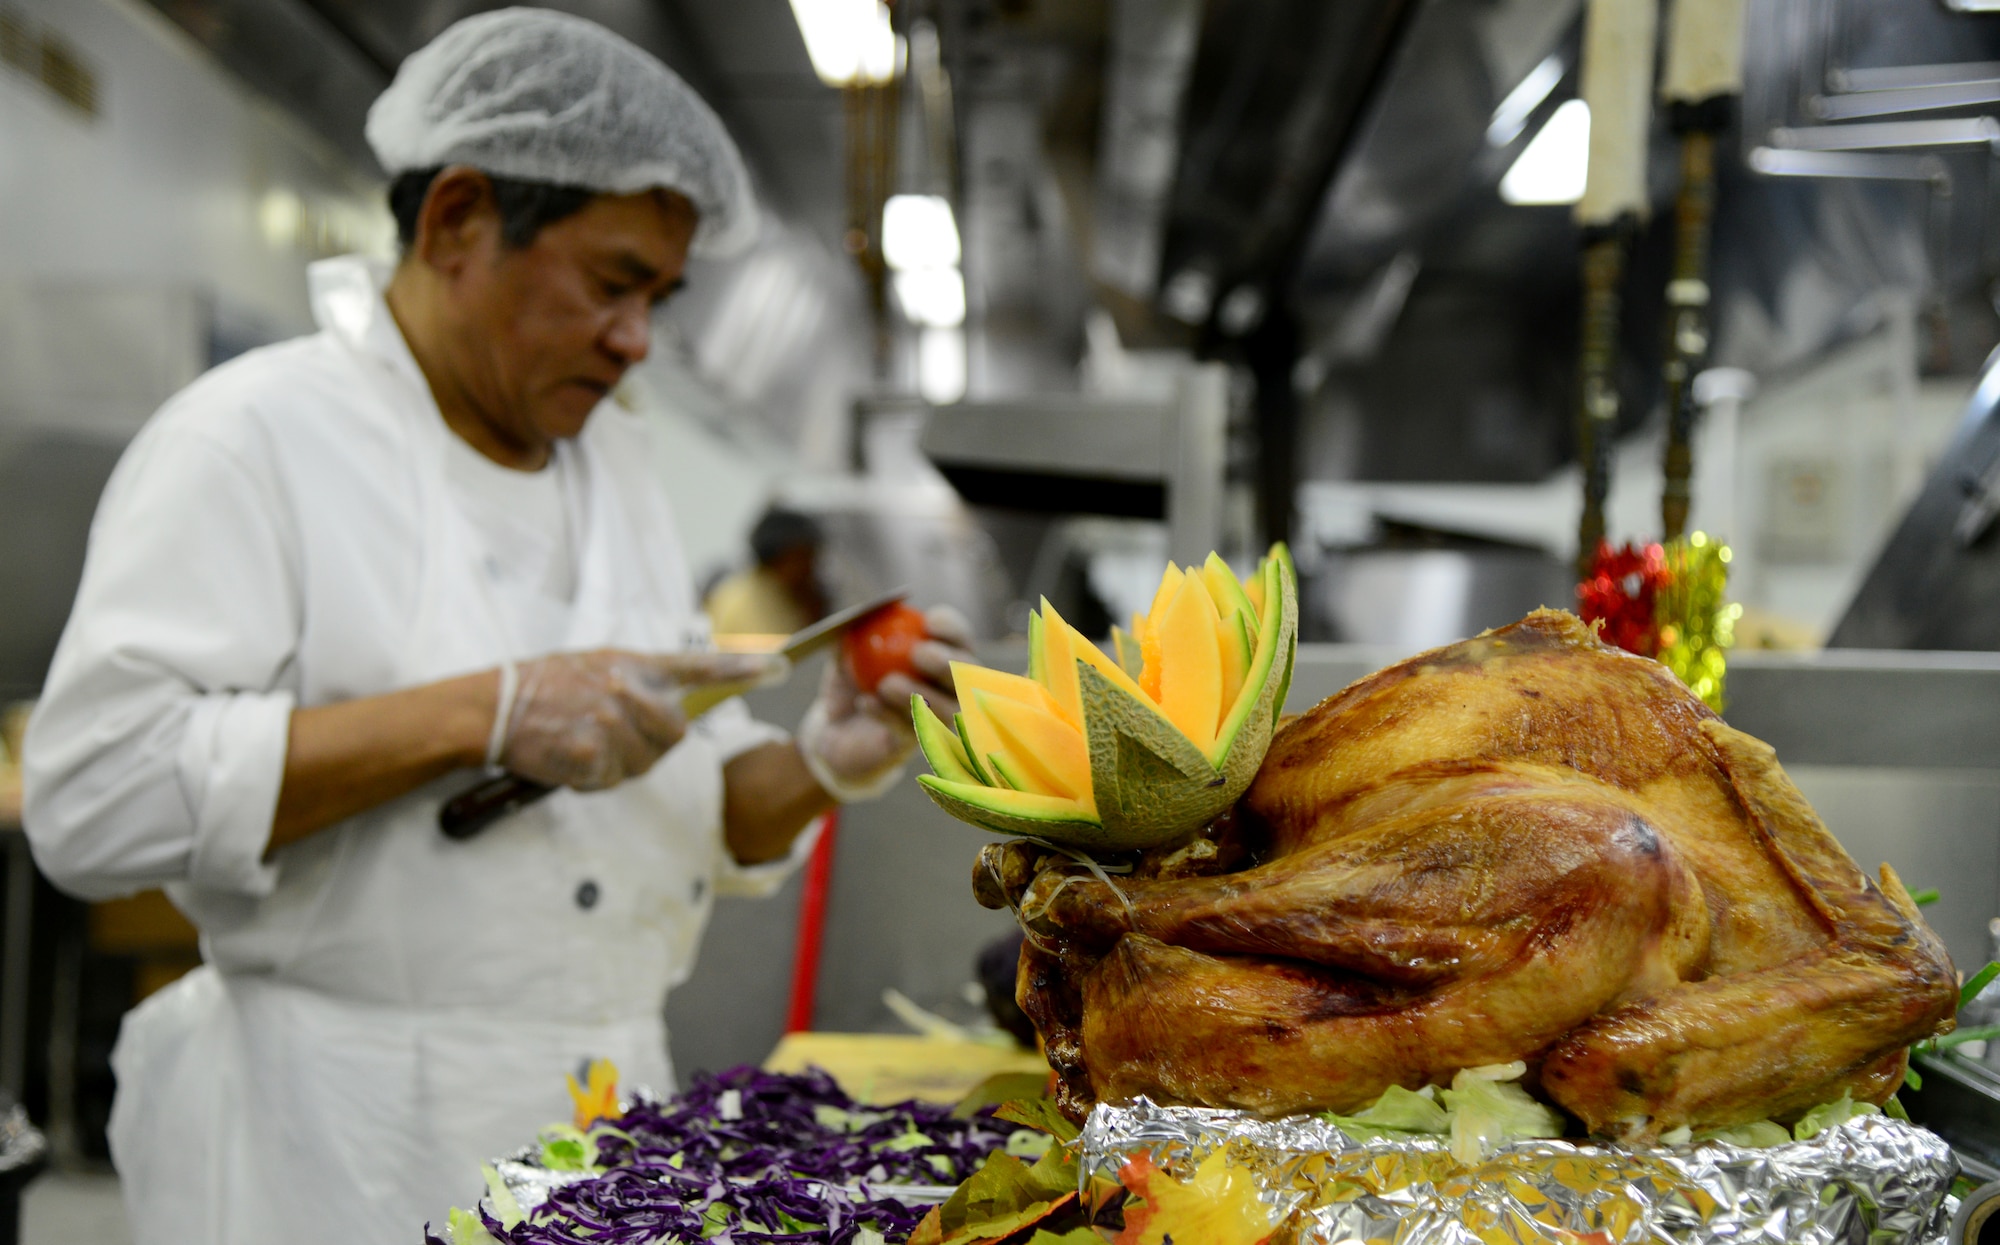 Fruits and vegetables are carved as decorations in preparation of the annual Thanksgiving meal, Nov. 27, 2014, at Al Udeid Air Base, Qatar. Over 400 turkeys were cooked and prepared for deployed servicemembers to enjoy. (U.S. Air Force photo by Senior Airman Kia Atkins)